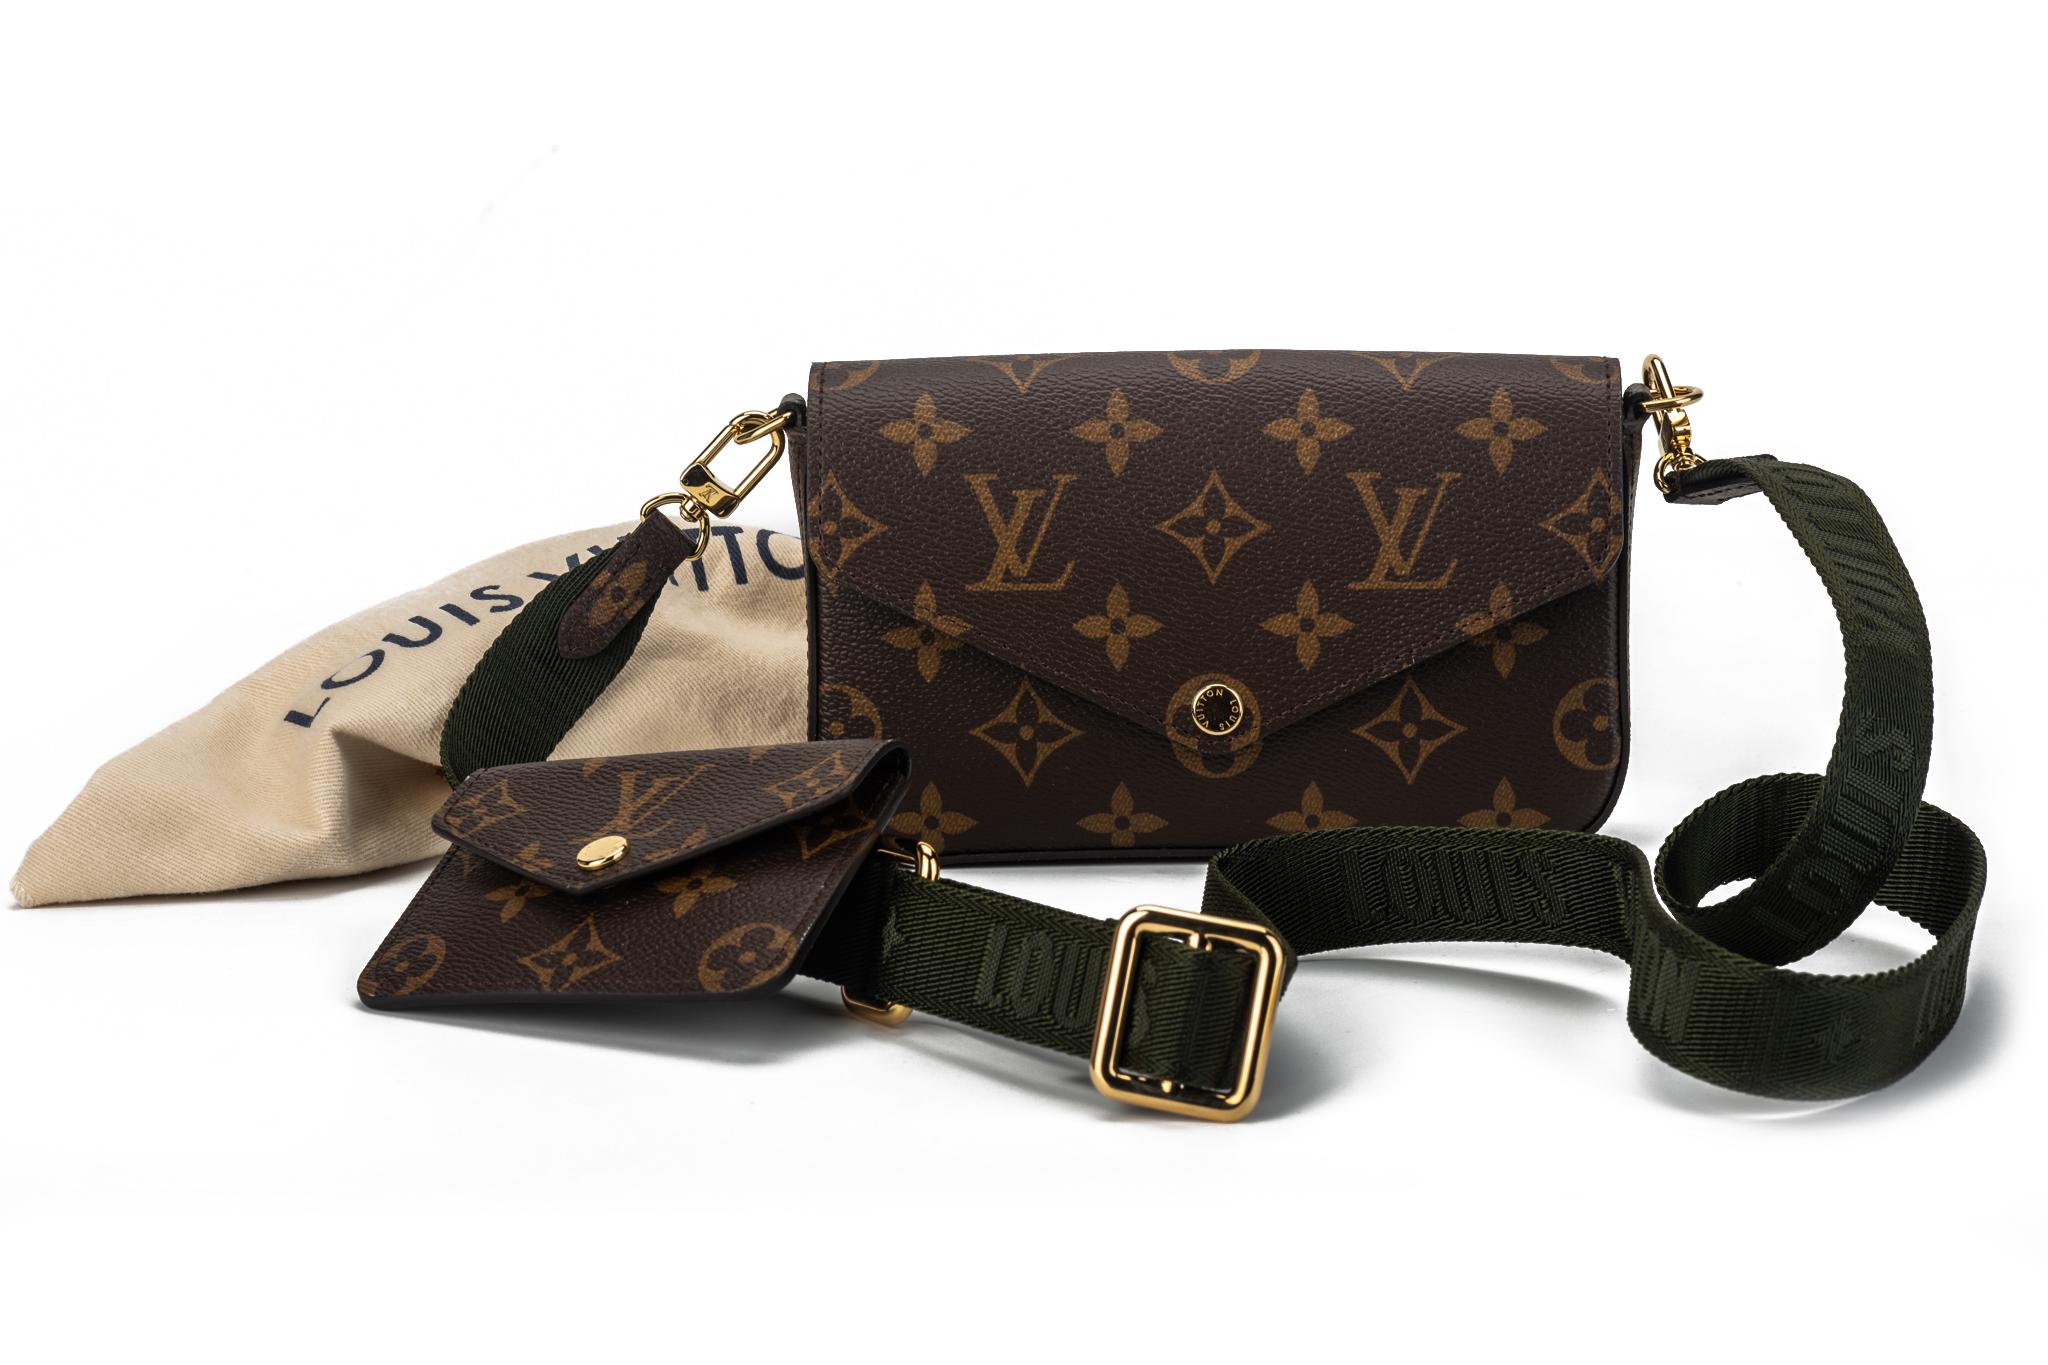 Louis Vuitton mini felicie multi pochette in brown classic monogram coated canvas and khaki green strap. Green epi leather interior lining. Brand new with original dust cover and box.